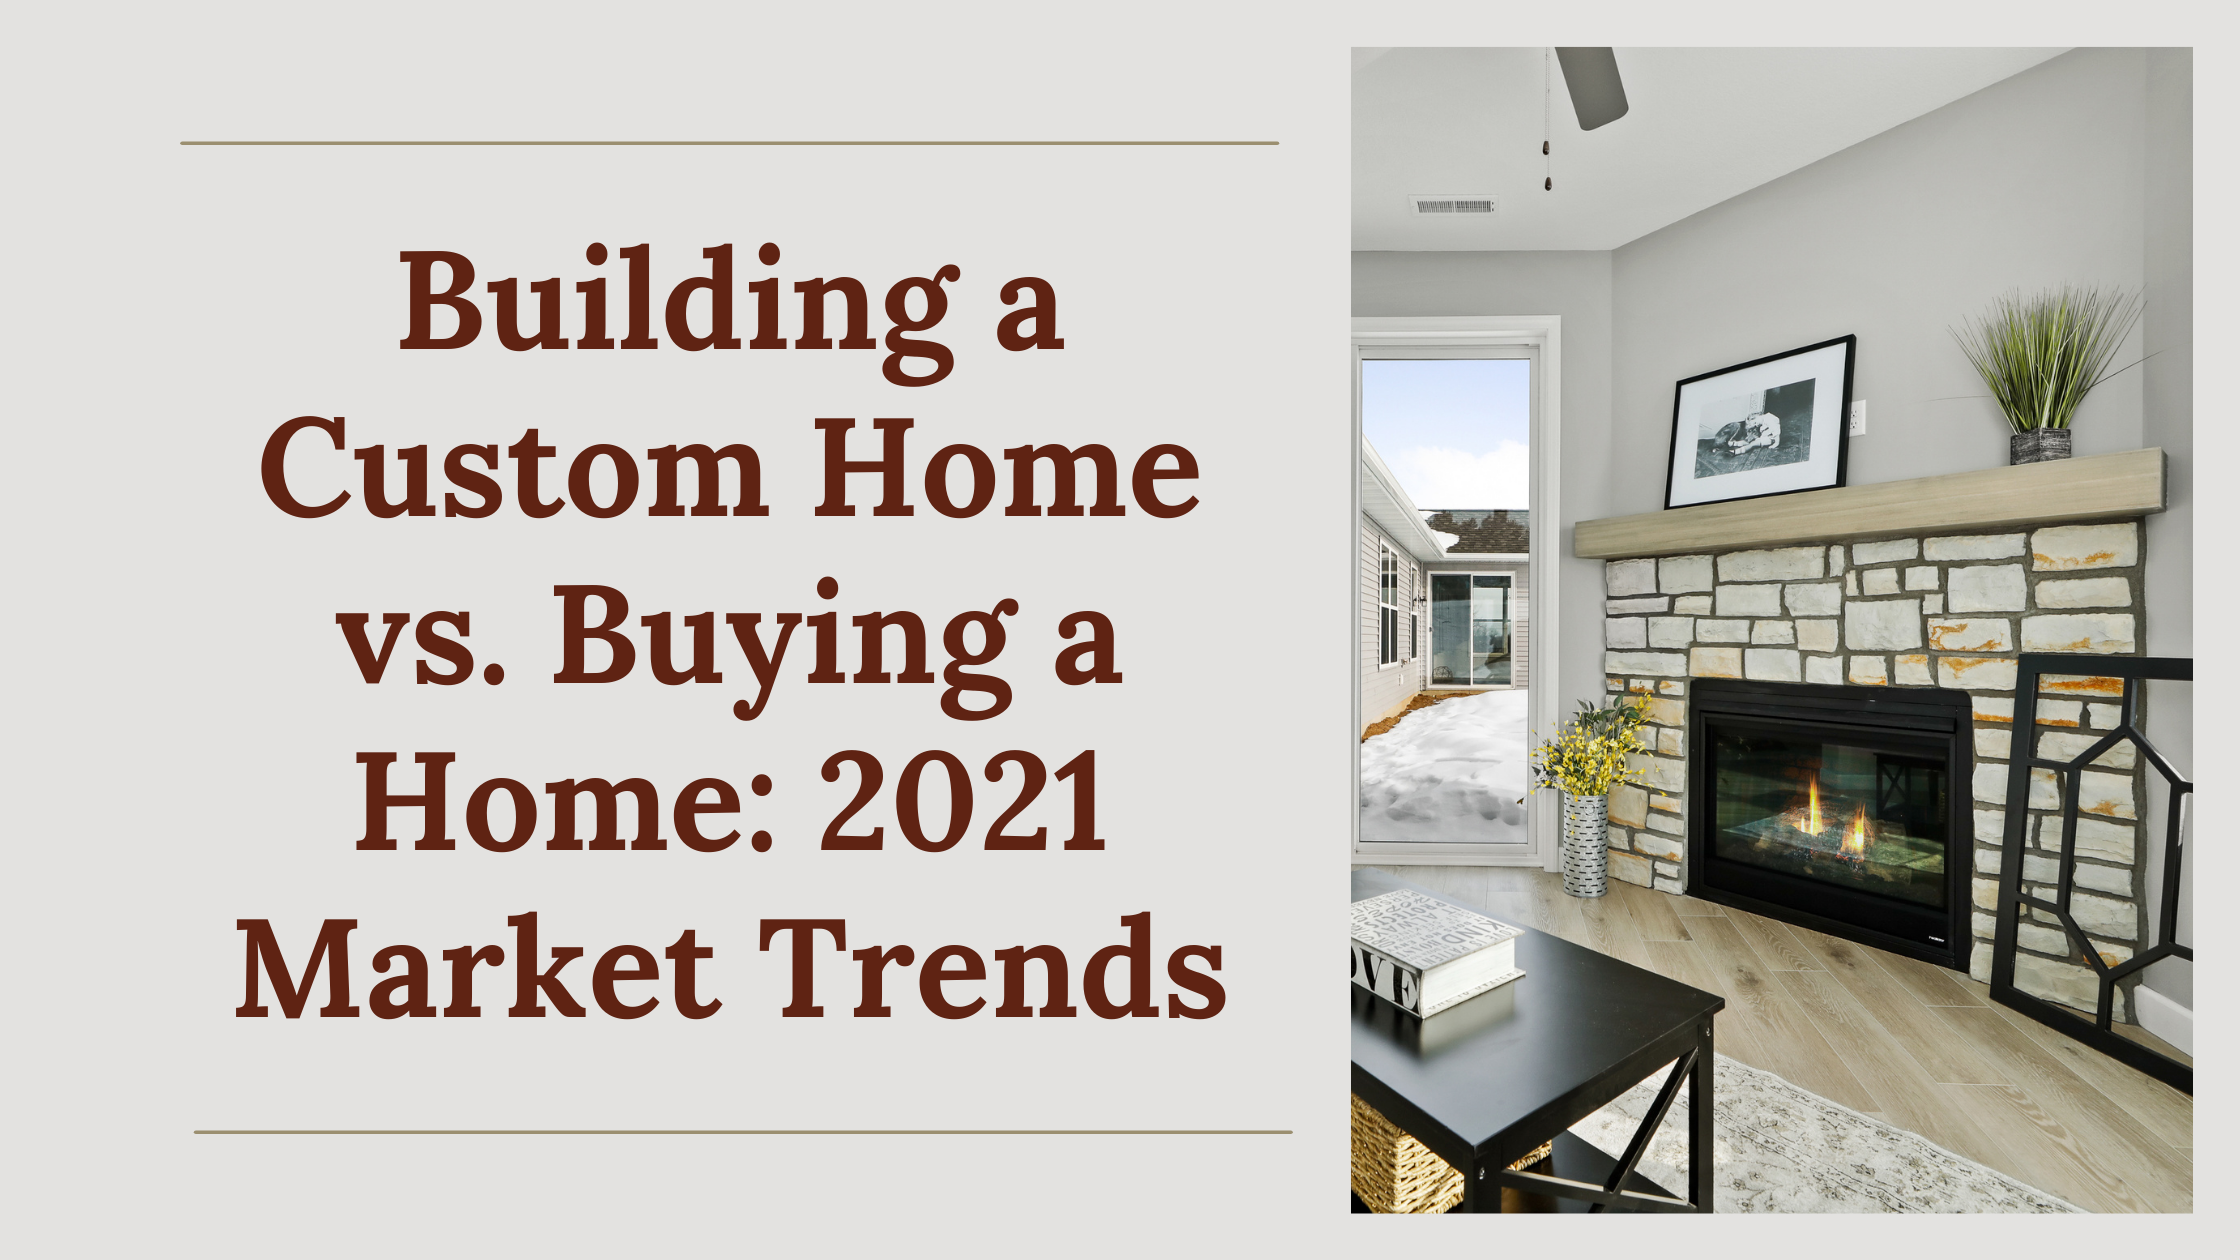 Building a Custom Home versus Buying a Home: 2021 Market Trends in Wisconsin